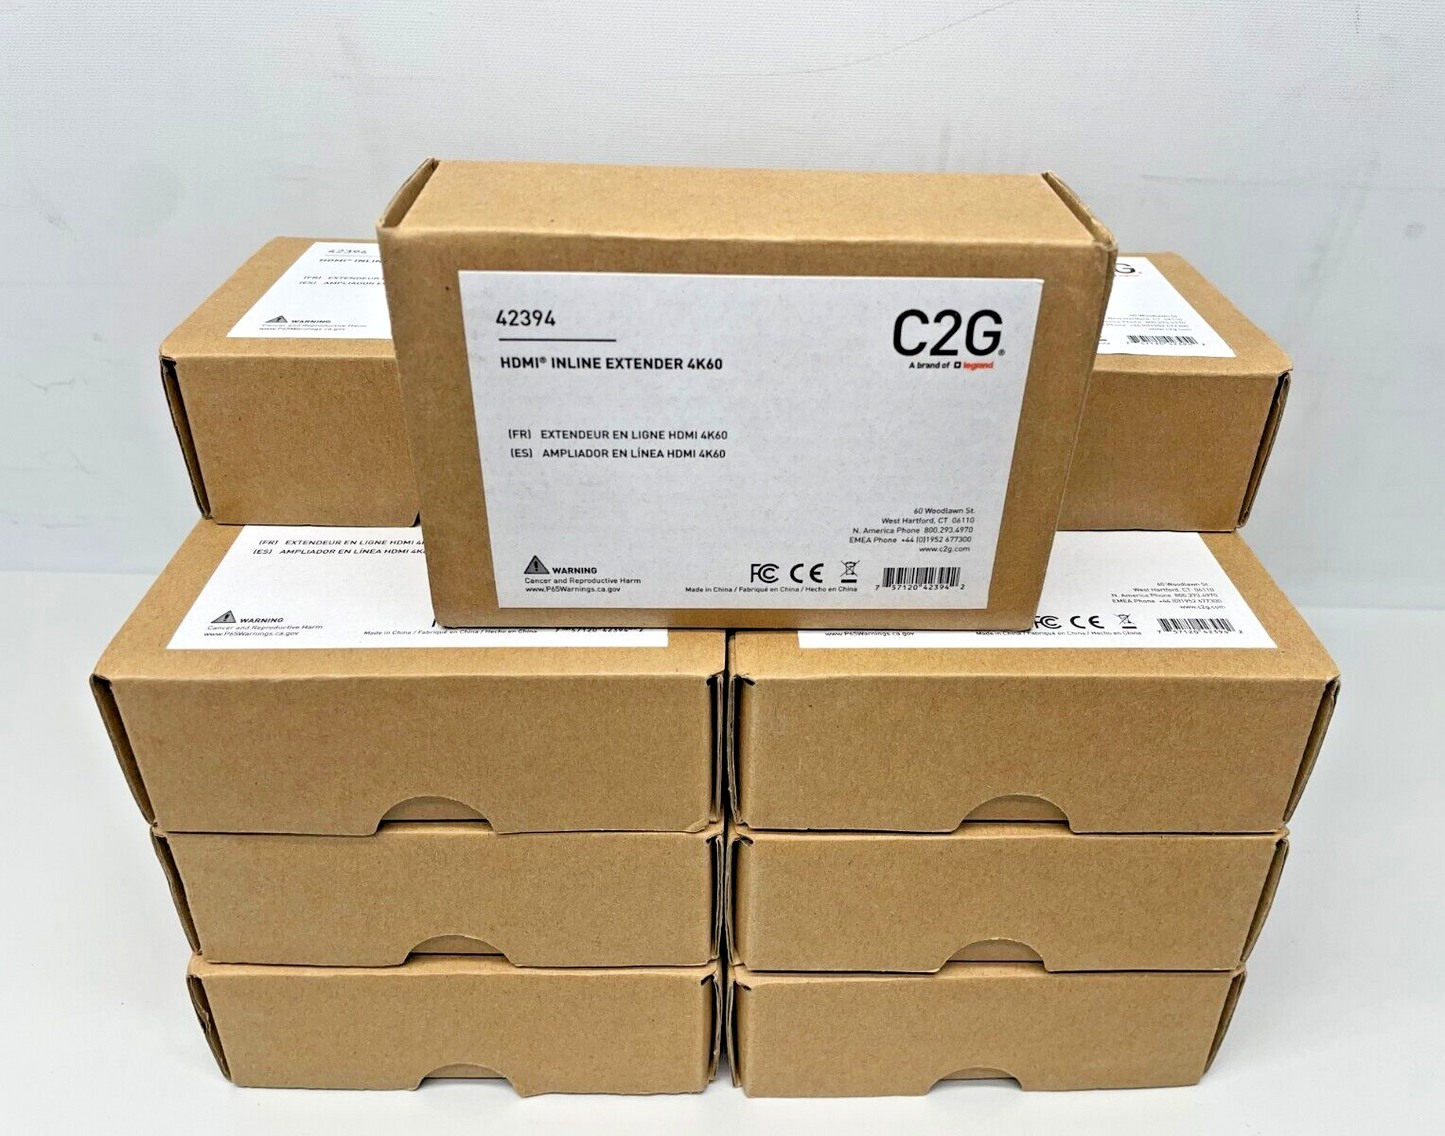 C2G 42394 HDMI Inline Extender Female to Female 4K60 LOT OF 15